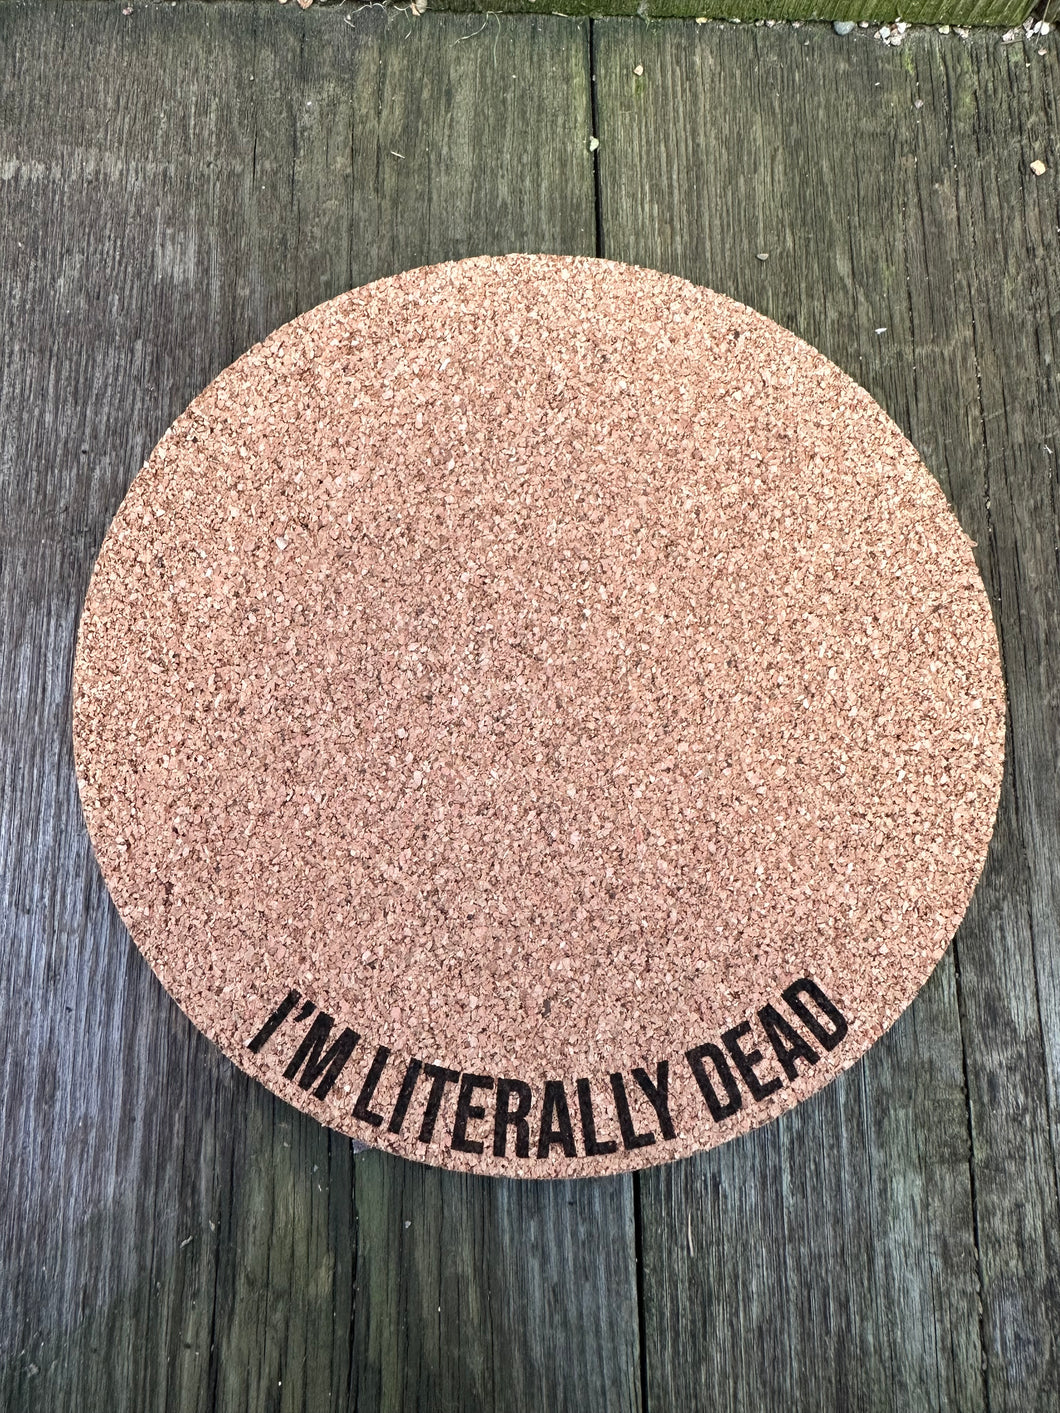 I'm Literally Dead Cork Plant Mat - Engraved Cork Round - Cork Bottom - No Plastic or Rubber - All Natural Material